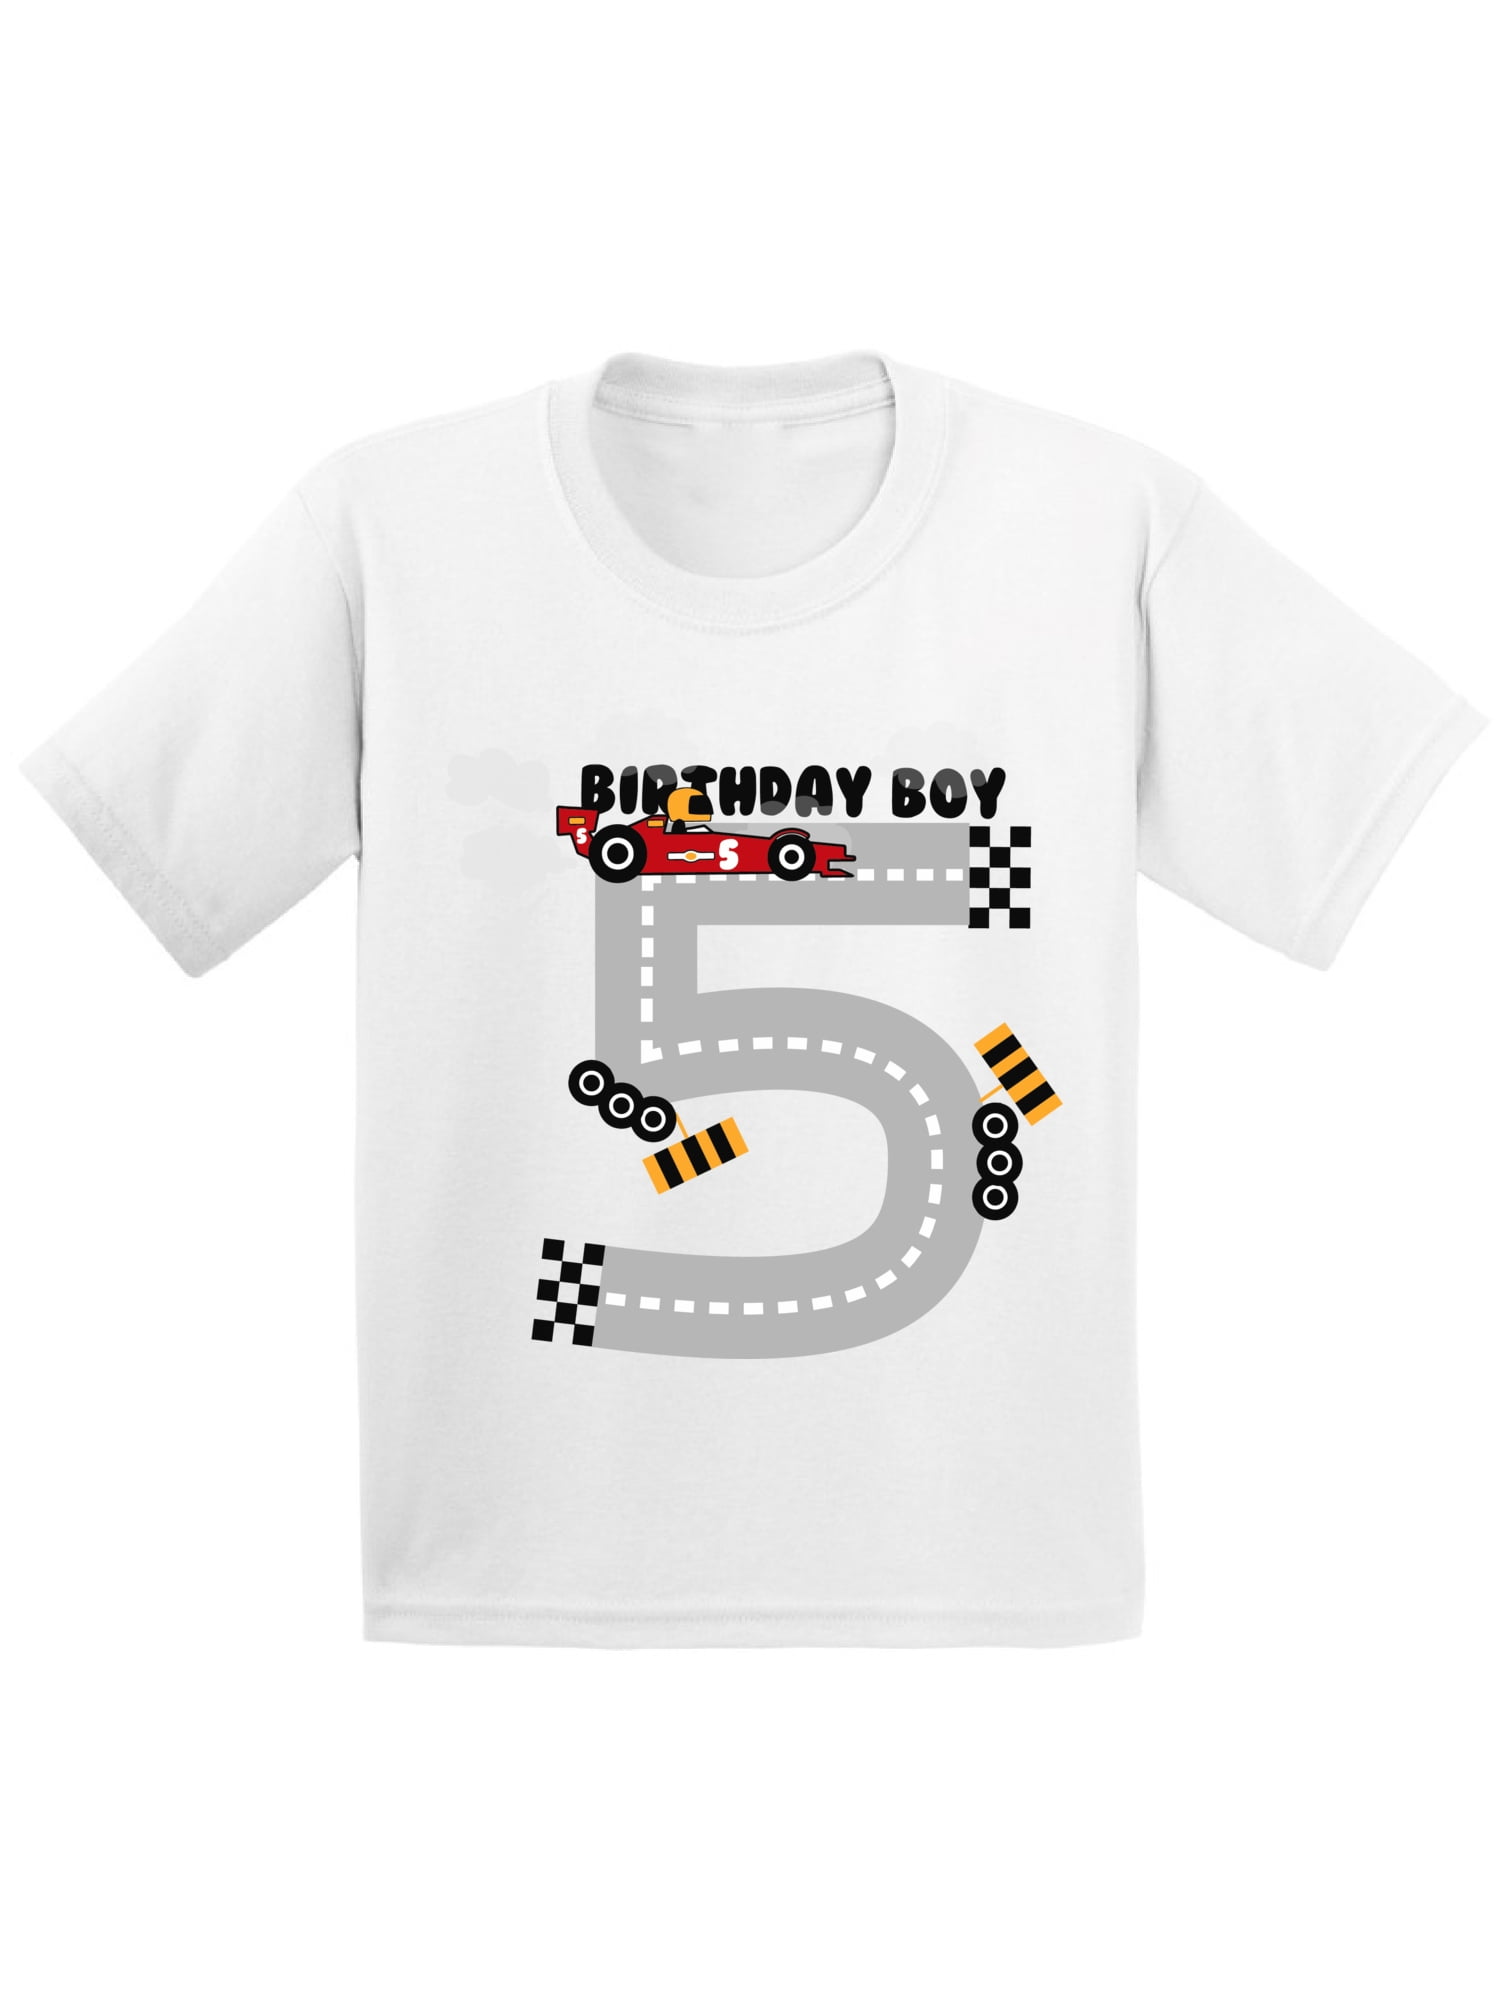 Five Year Old Birthday Gift 5th Birthday Shirt Boy Fifth Birthday Outfit